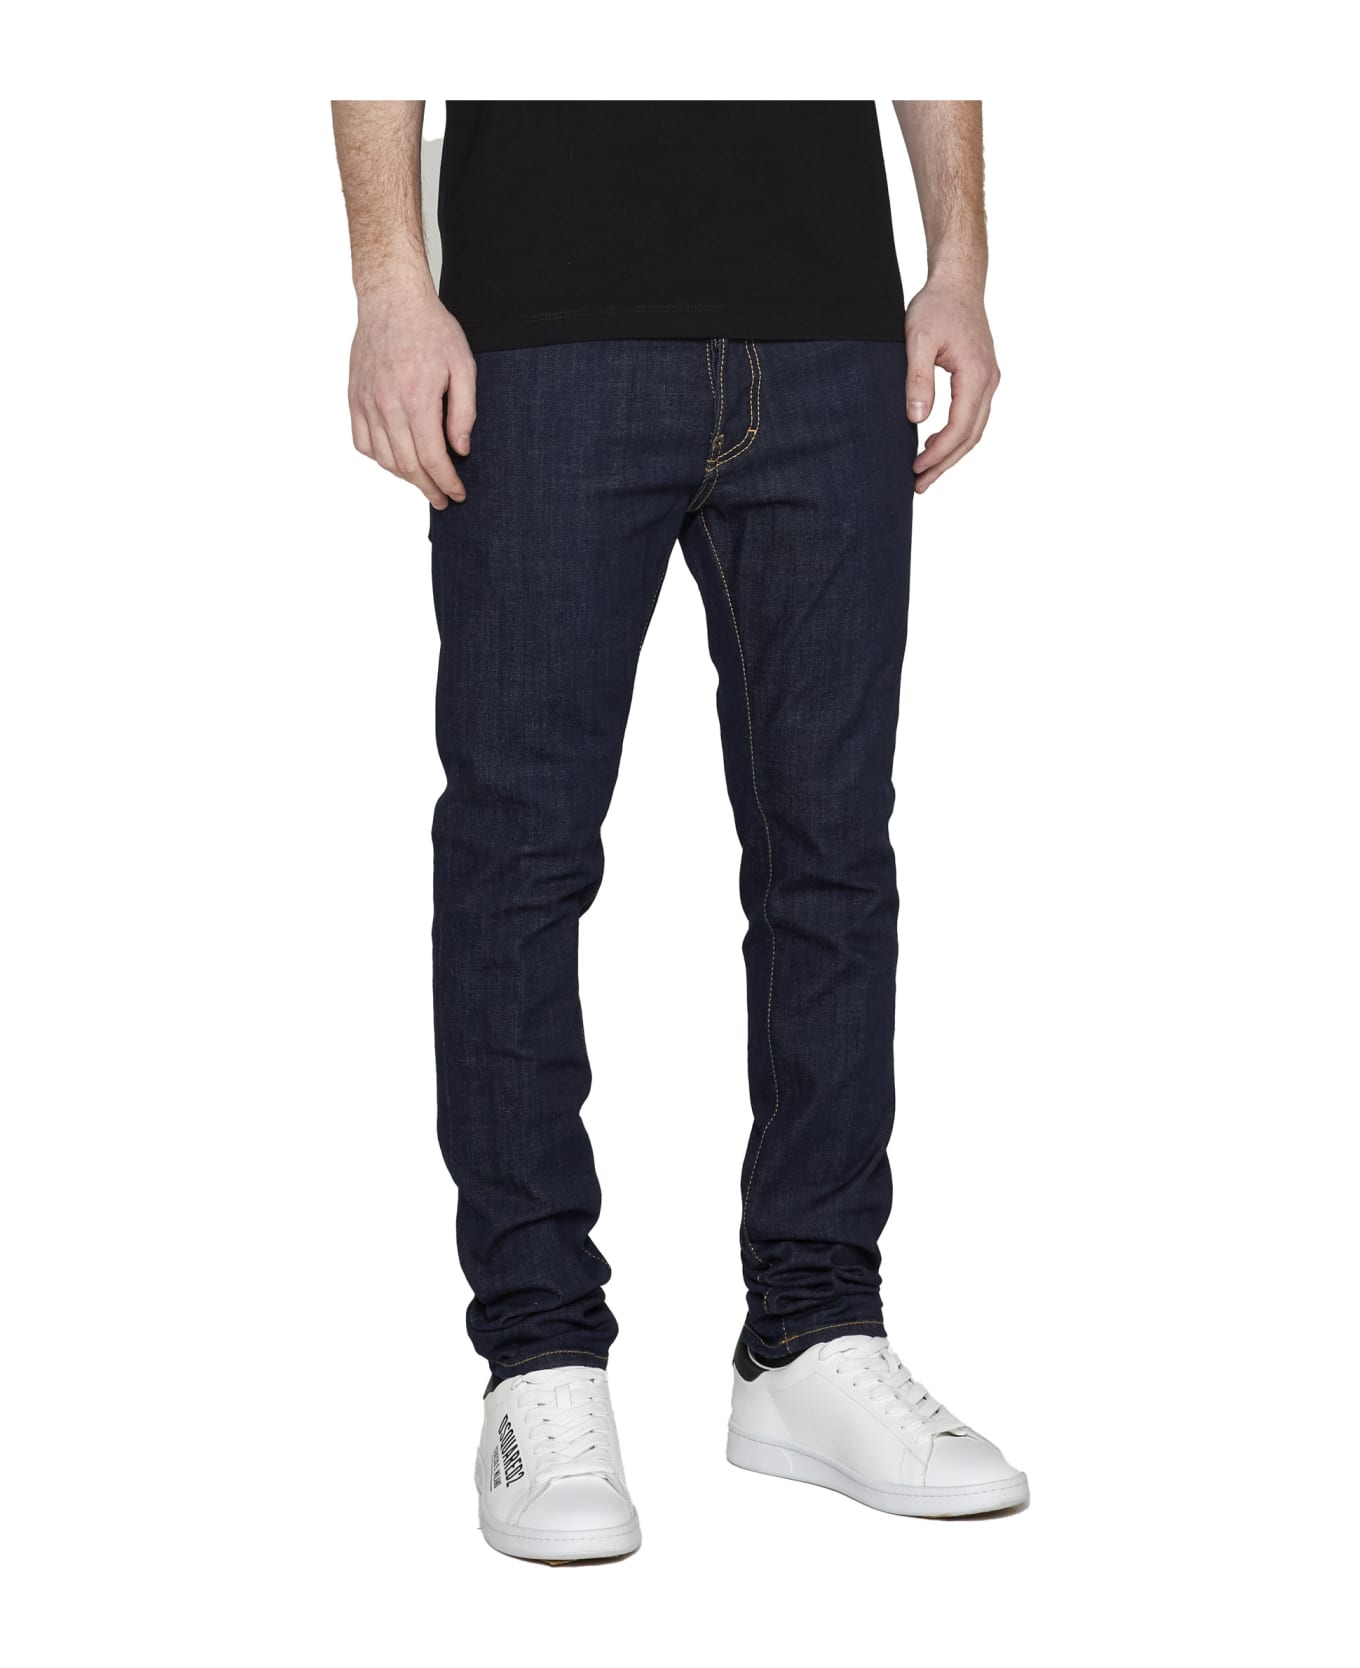 Dsquared2 Cool Guy Jeans In Dark Rinse Wash - Blue Navy デニム